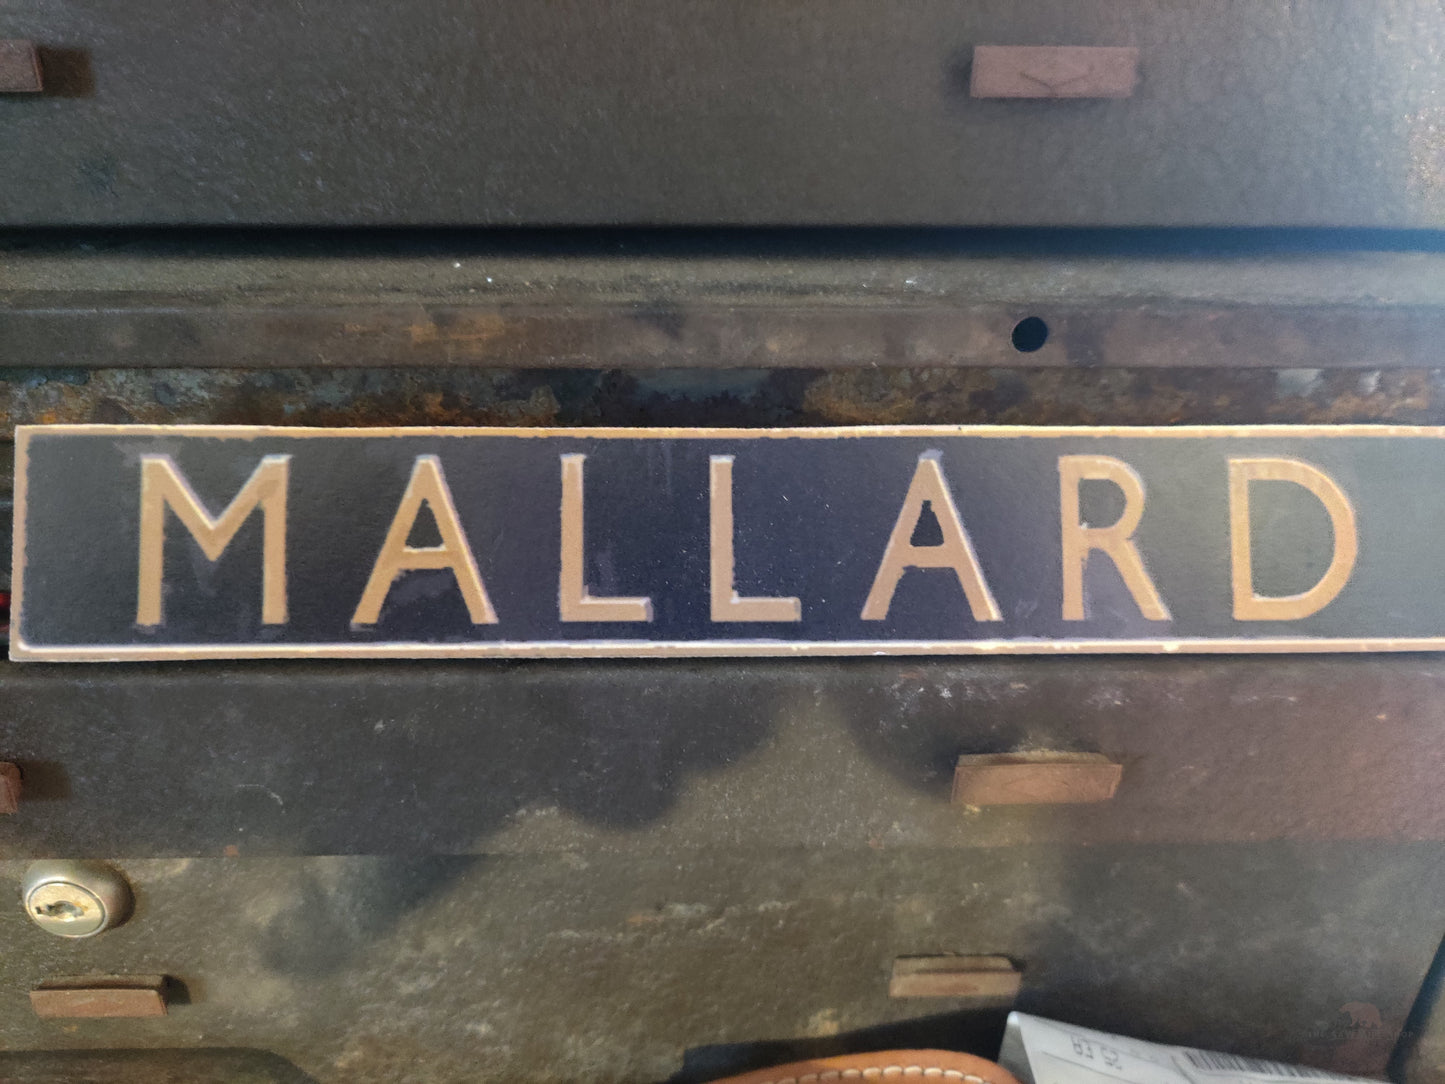 British Railway Locomotive Number Name Plate Wood Cutout-The Sawmill Shop